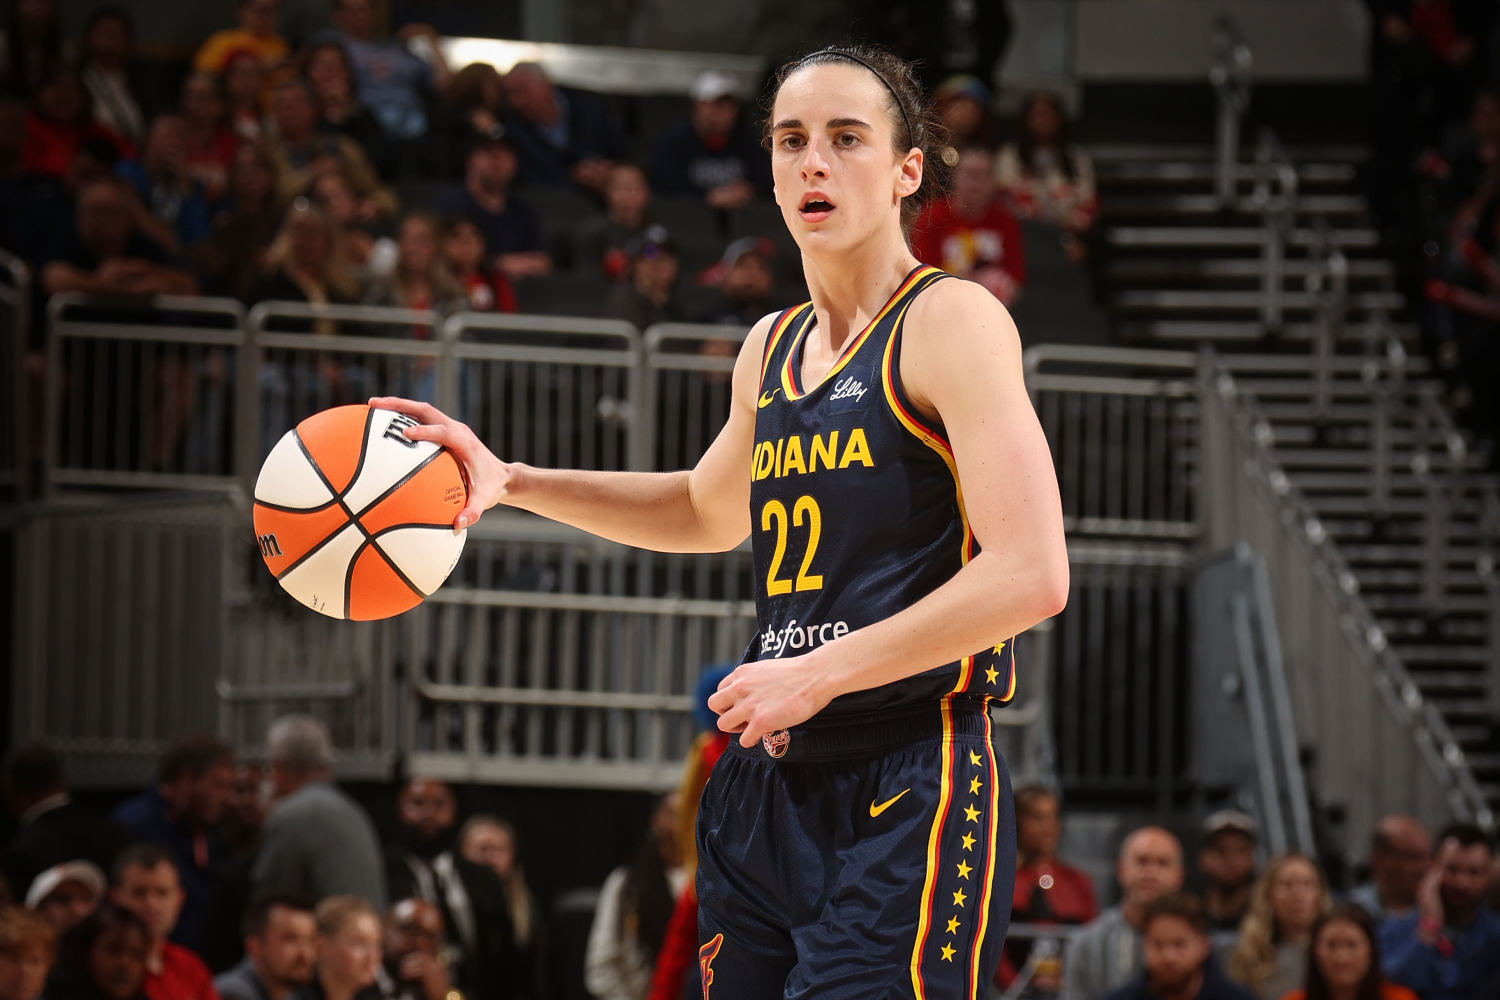 Caitlin Clark ready take the WNBA by storm: ‘This is what you've worked for'